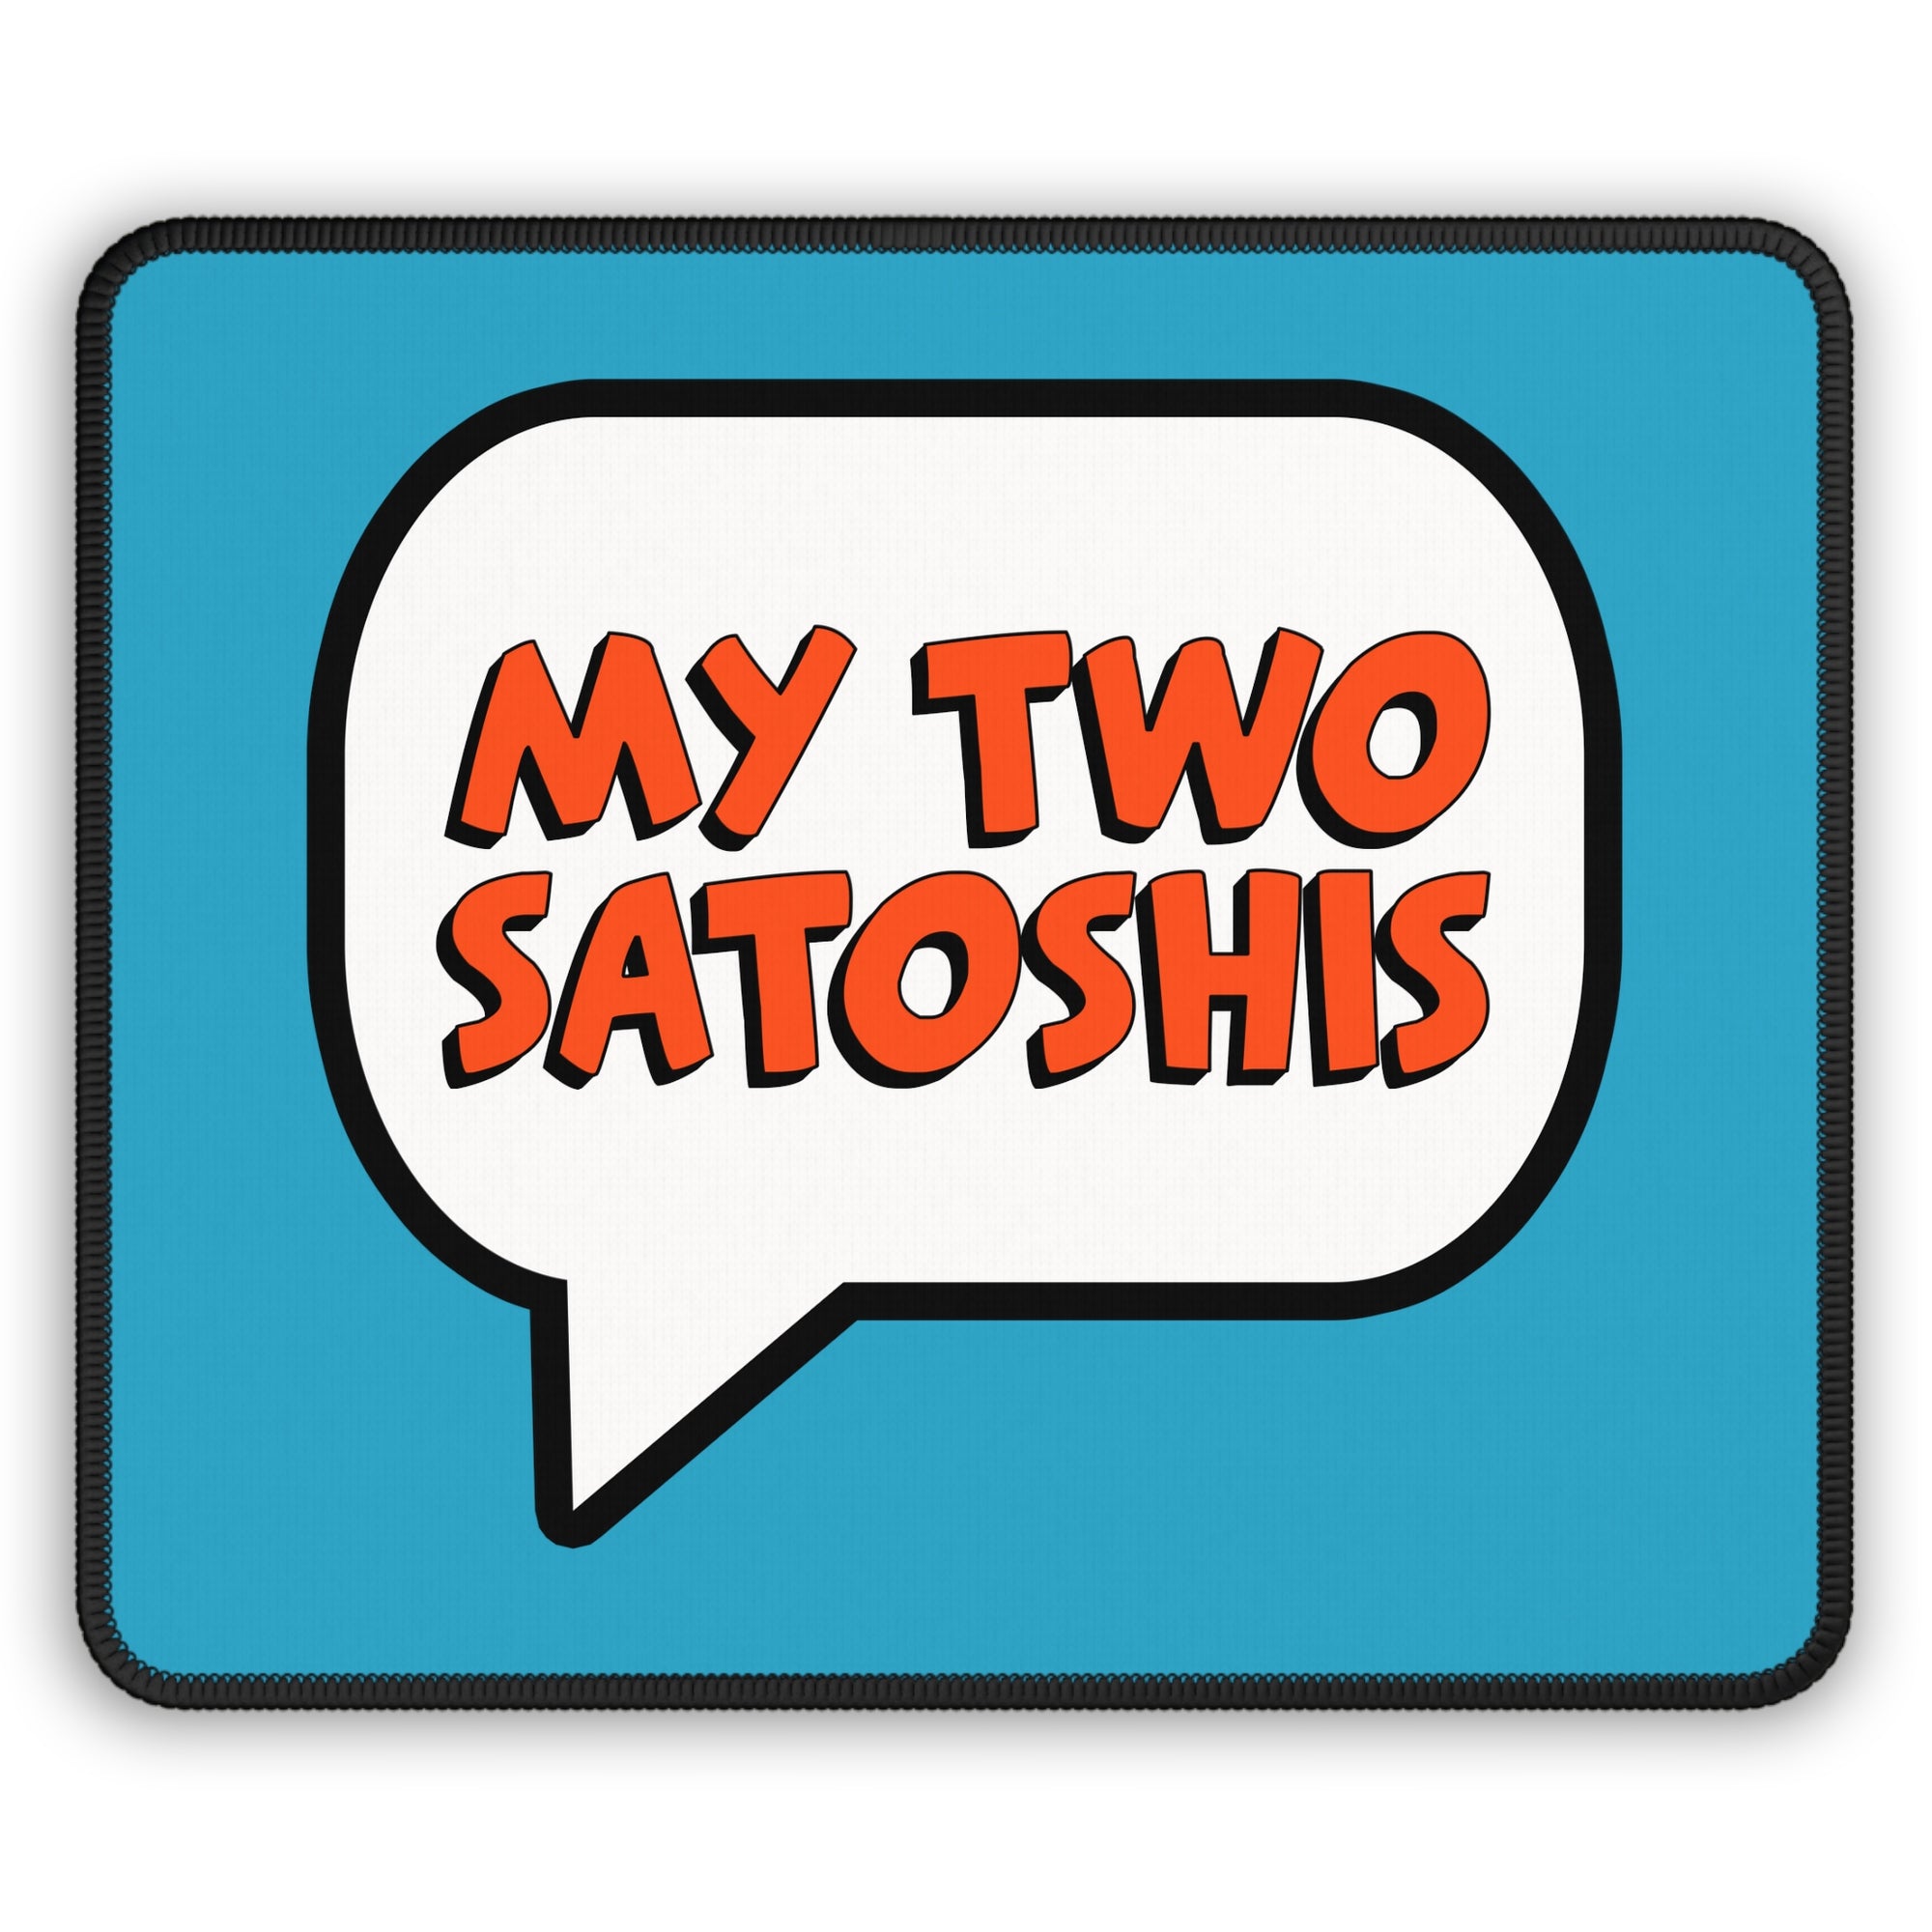 Bitcoin Merchandise - My Two Satoshis Mouse Pad. Close Up View.